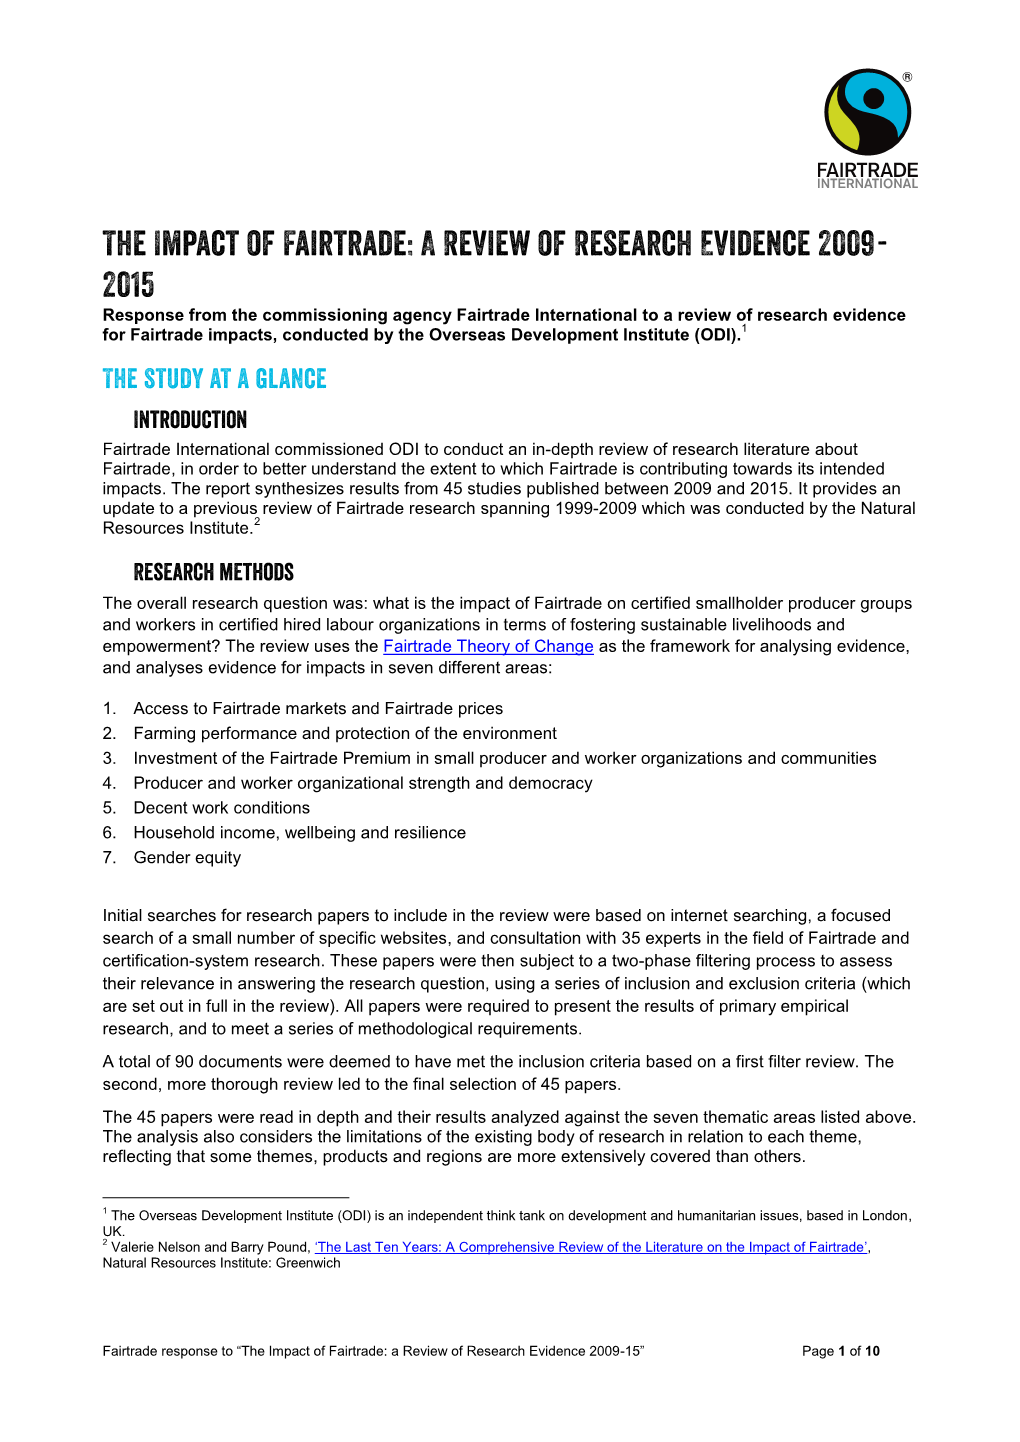 The Impact of Fairtrade: a Review of Research Evidence 2009- 2015